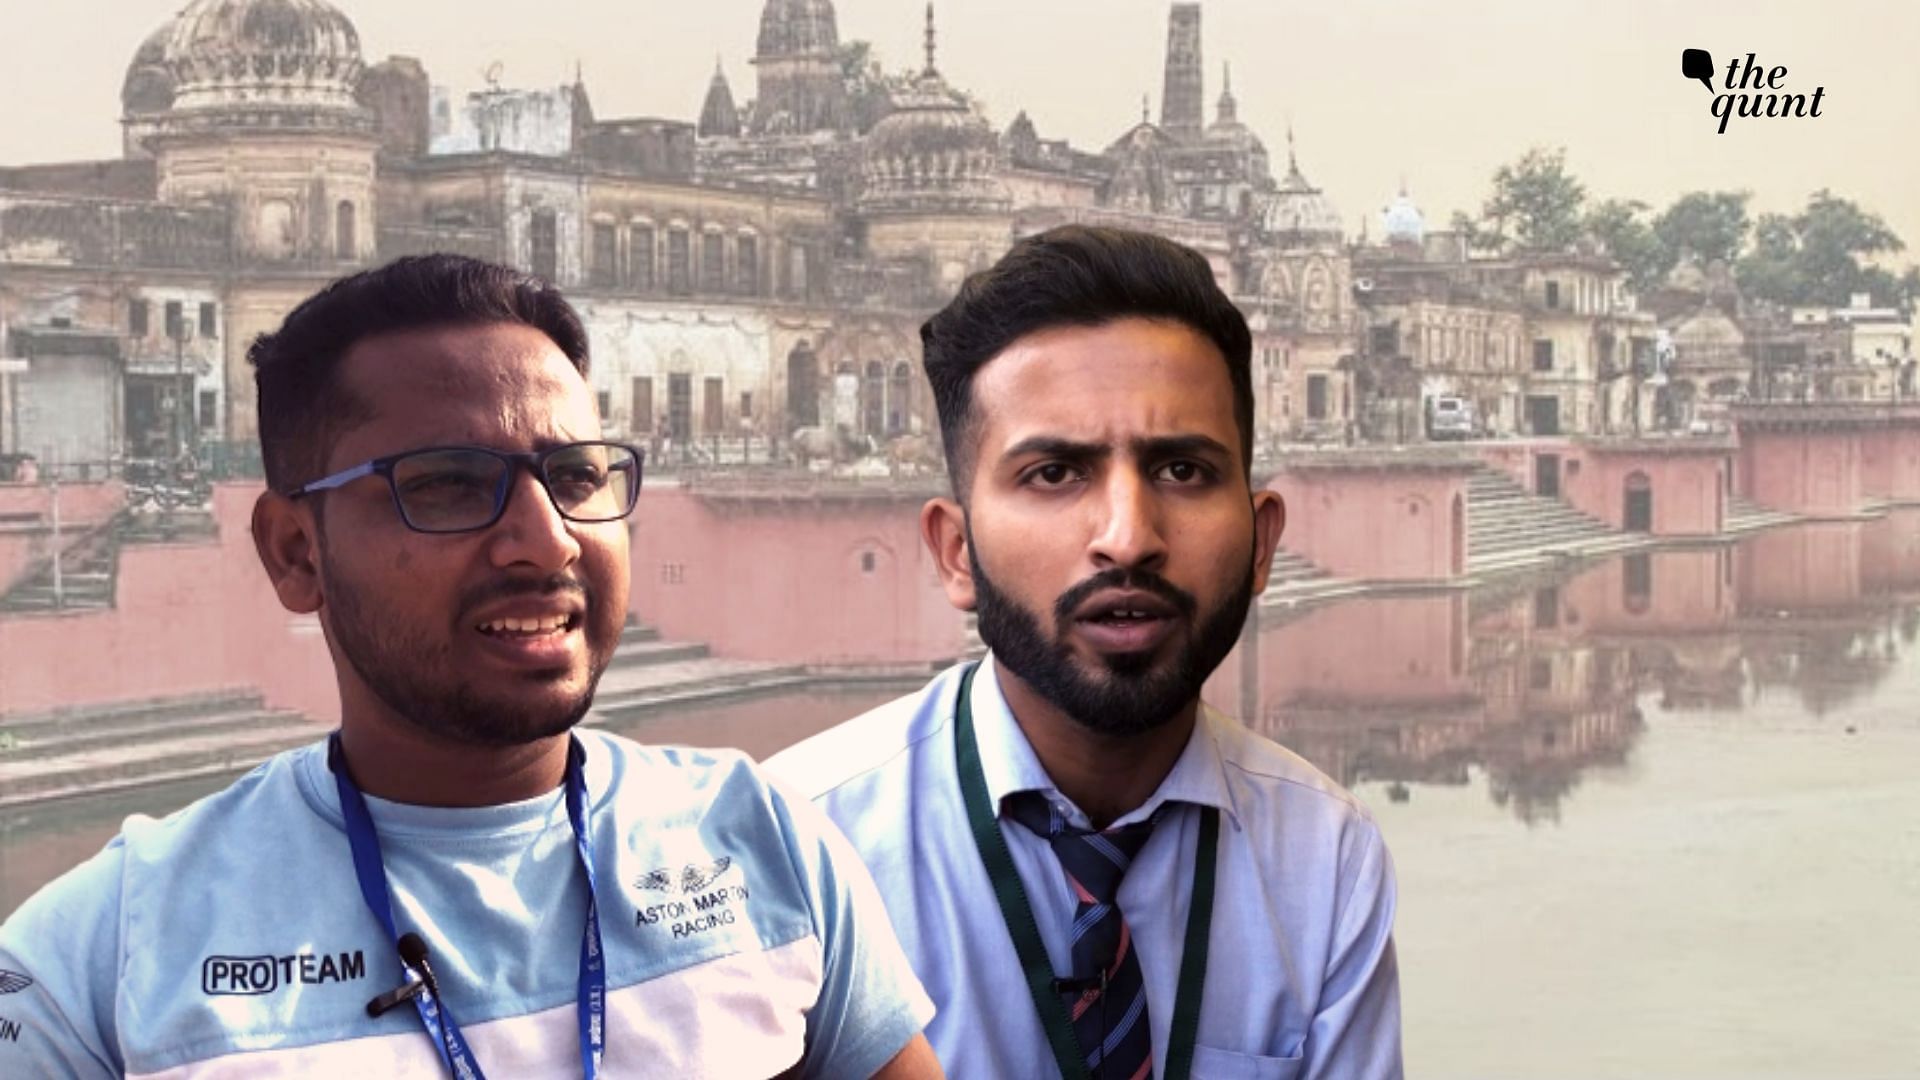 Ayodhya’s youth wants to move beyond the Mandir-Masjid debate and talk about jobs and development.